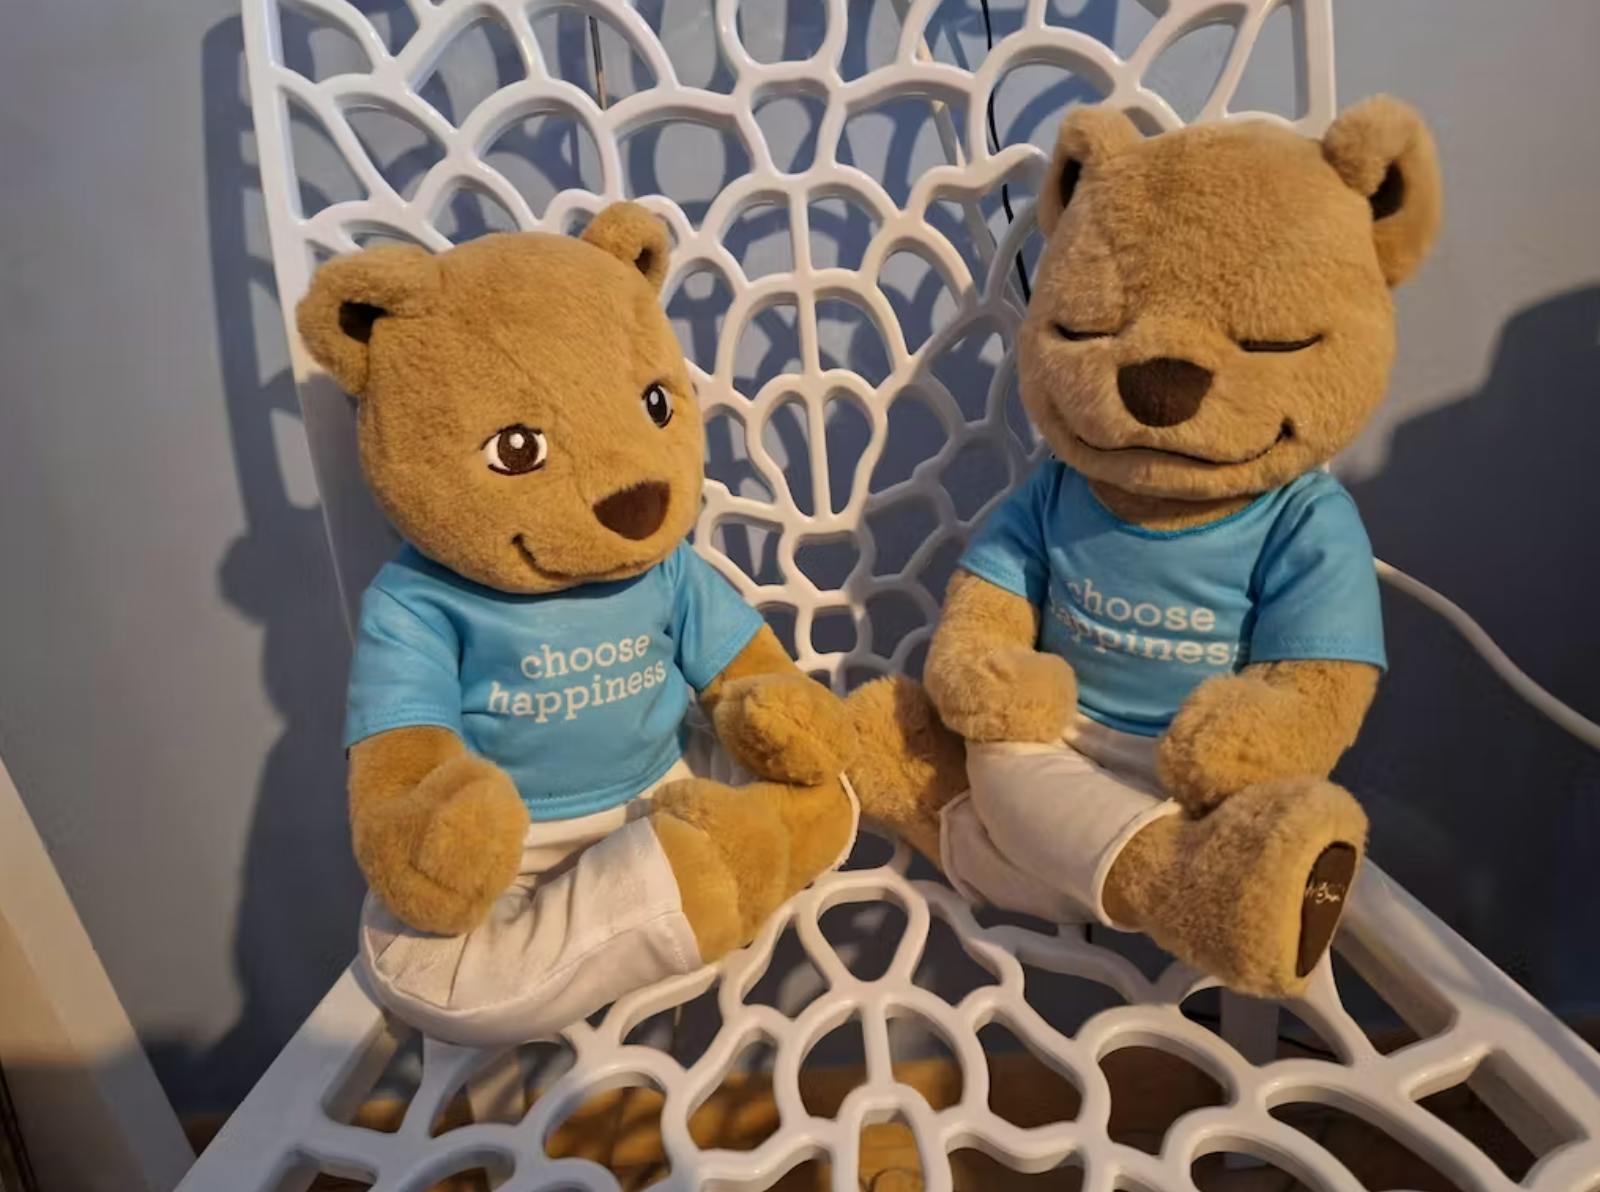 Hospice teddy bear project continues to make memories | 13newsnow.com